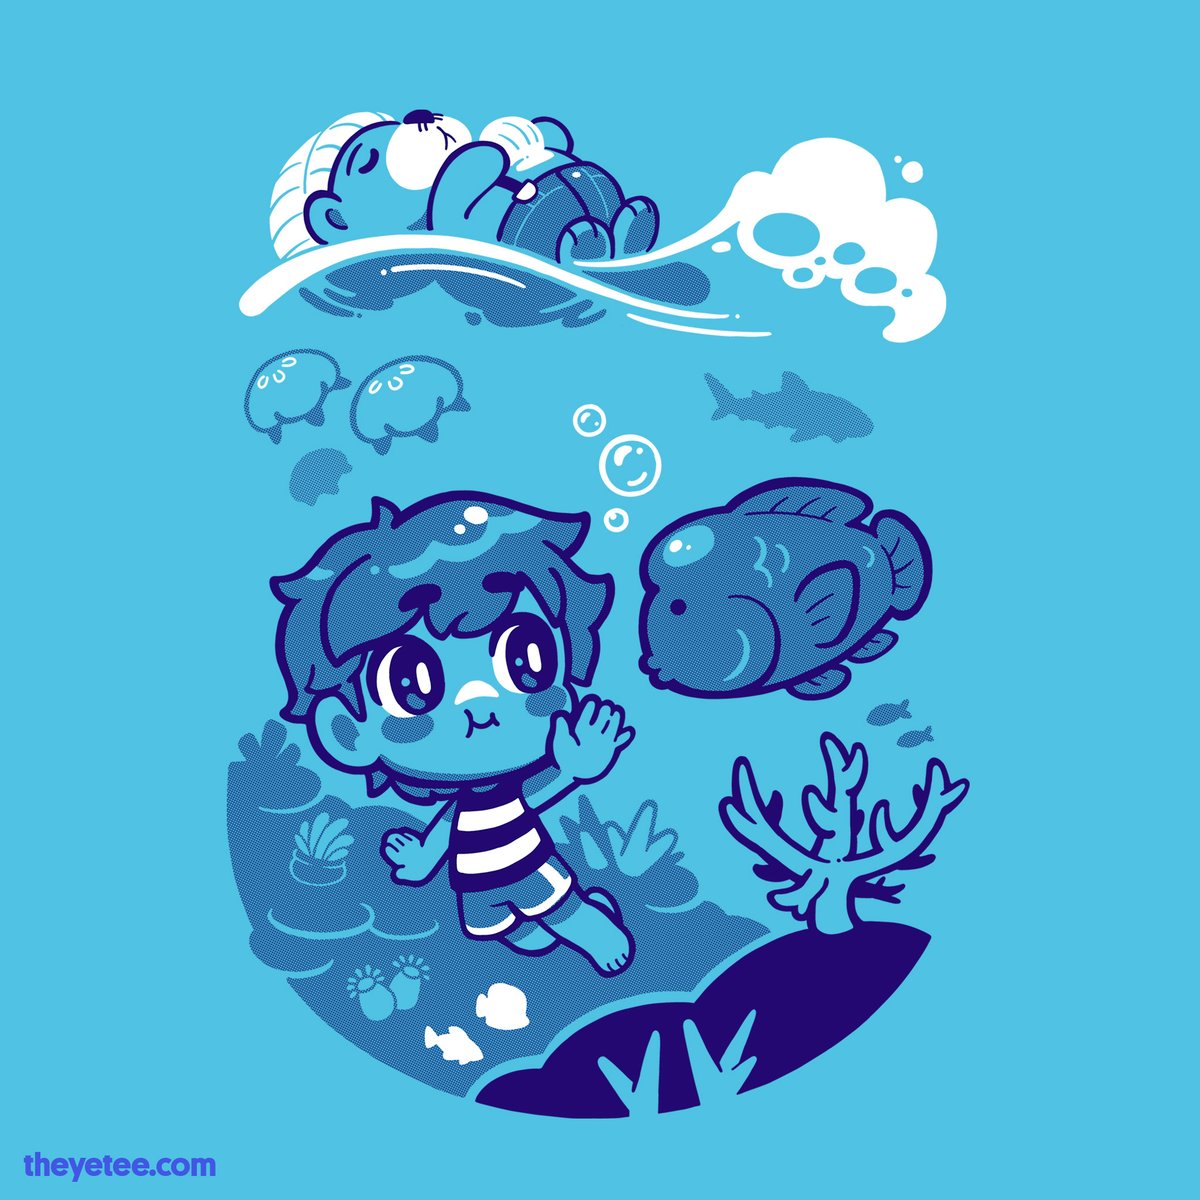 「How low can you go? Designed by  and ava」|The Yetee 🌈のイラスト